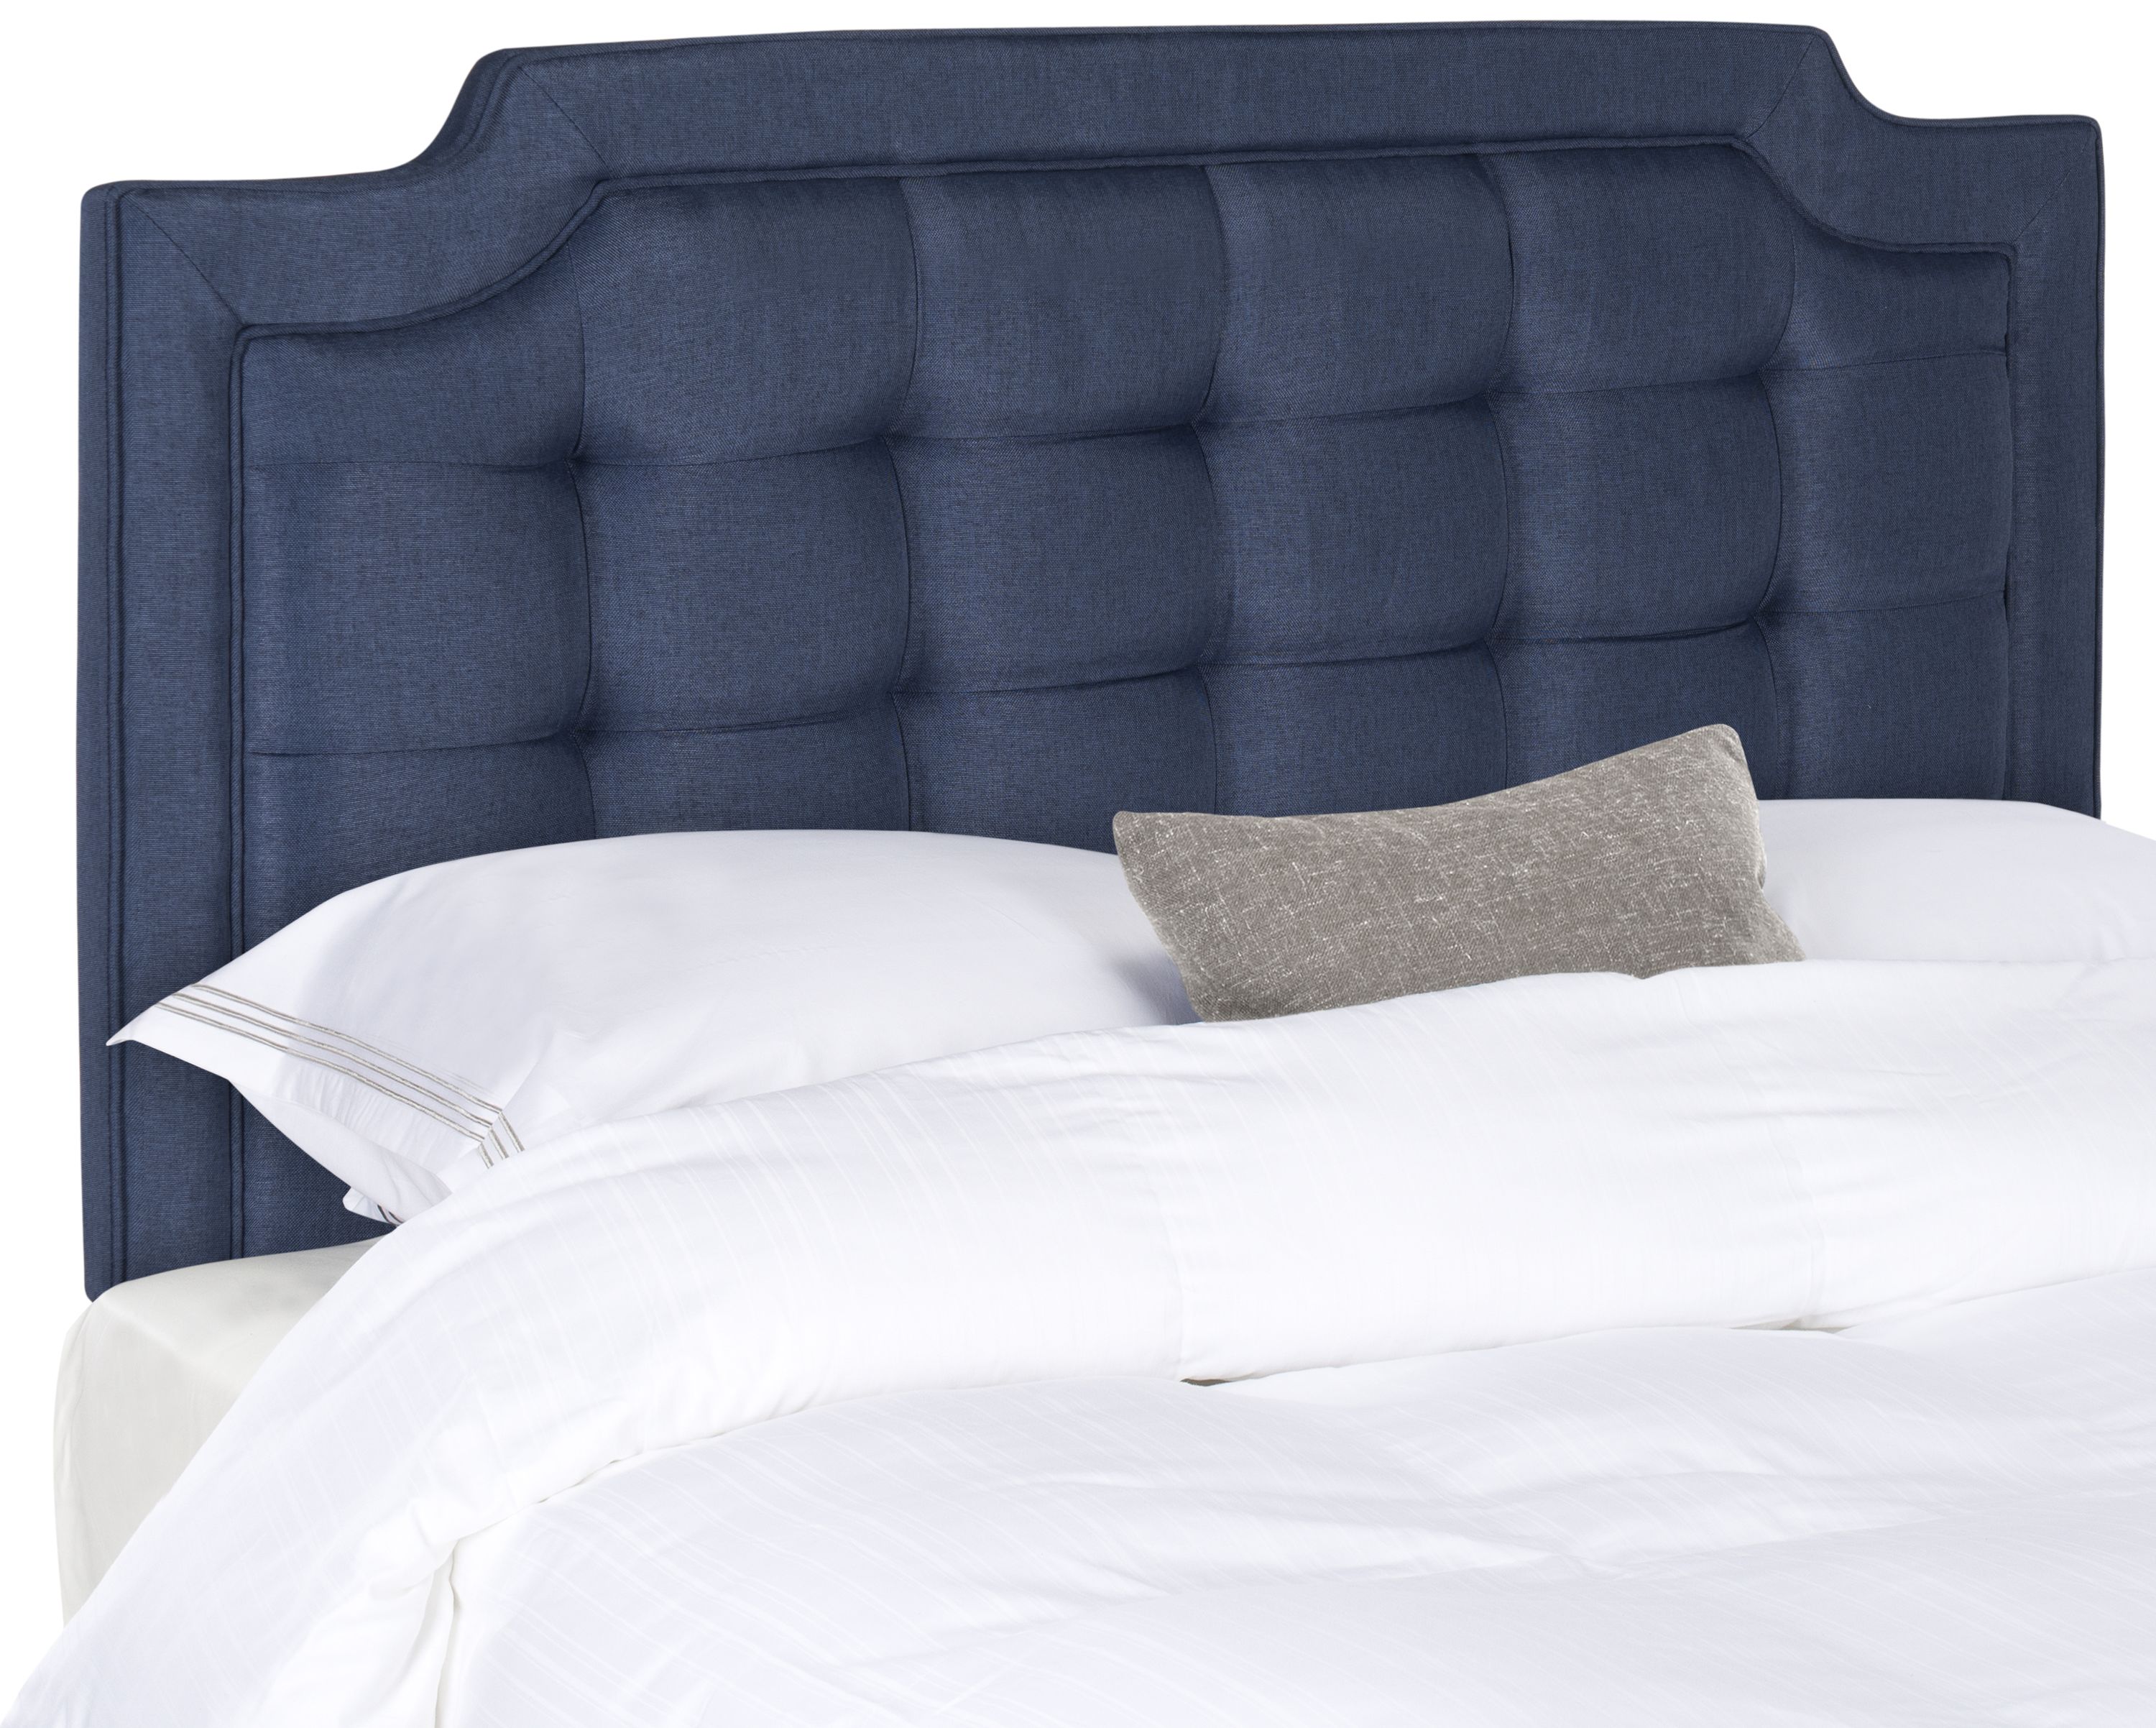 Safavieh Sapphire Navy King Synthetic Upholstered Headboard at Lowes.com